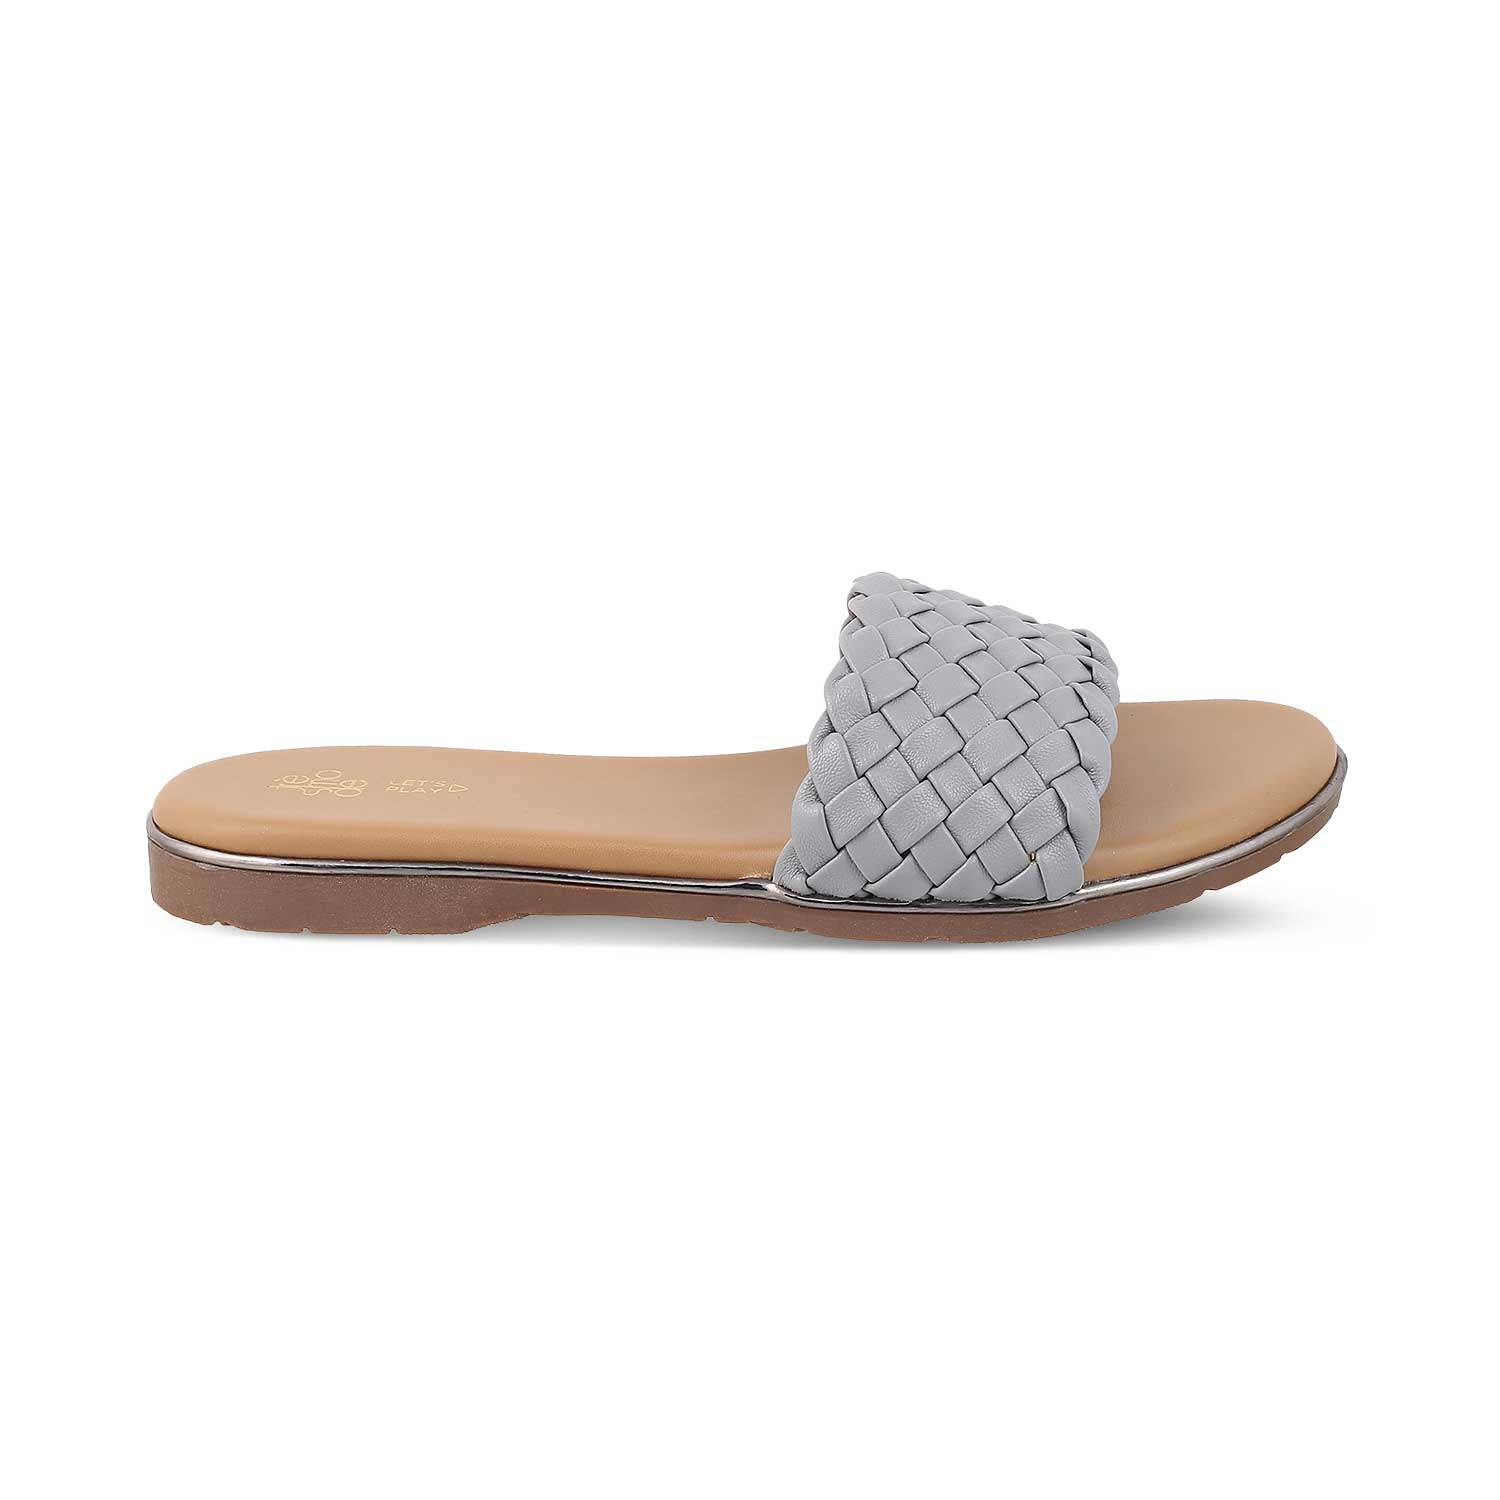 The We Grey Women's Casual Flats Tresmode